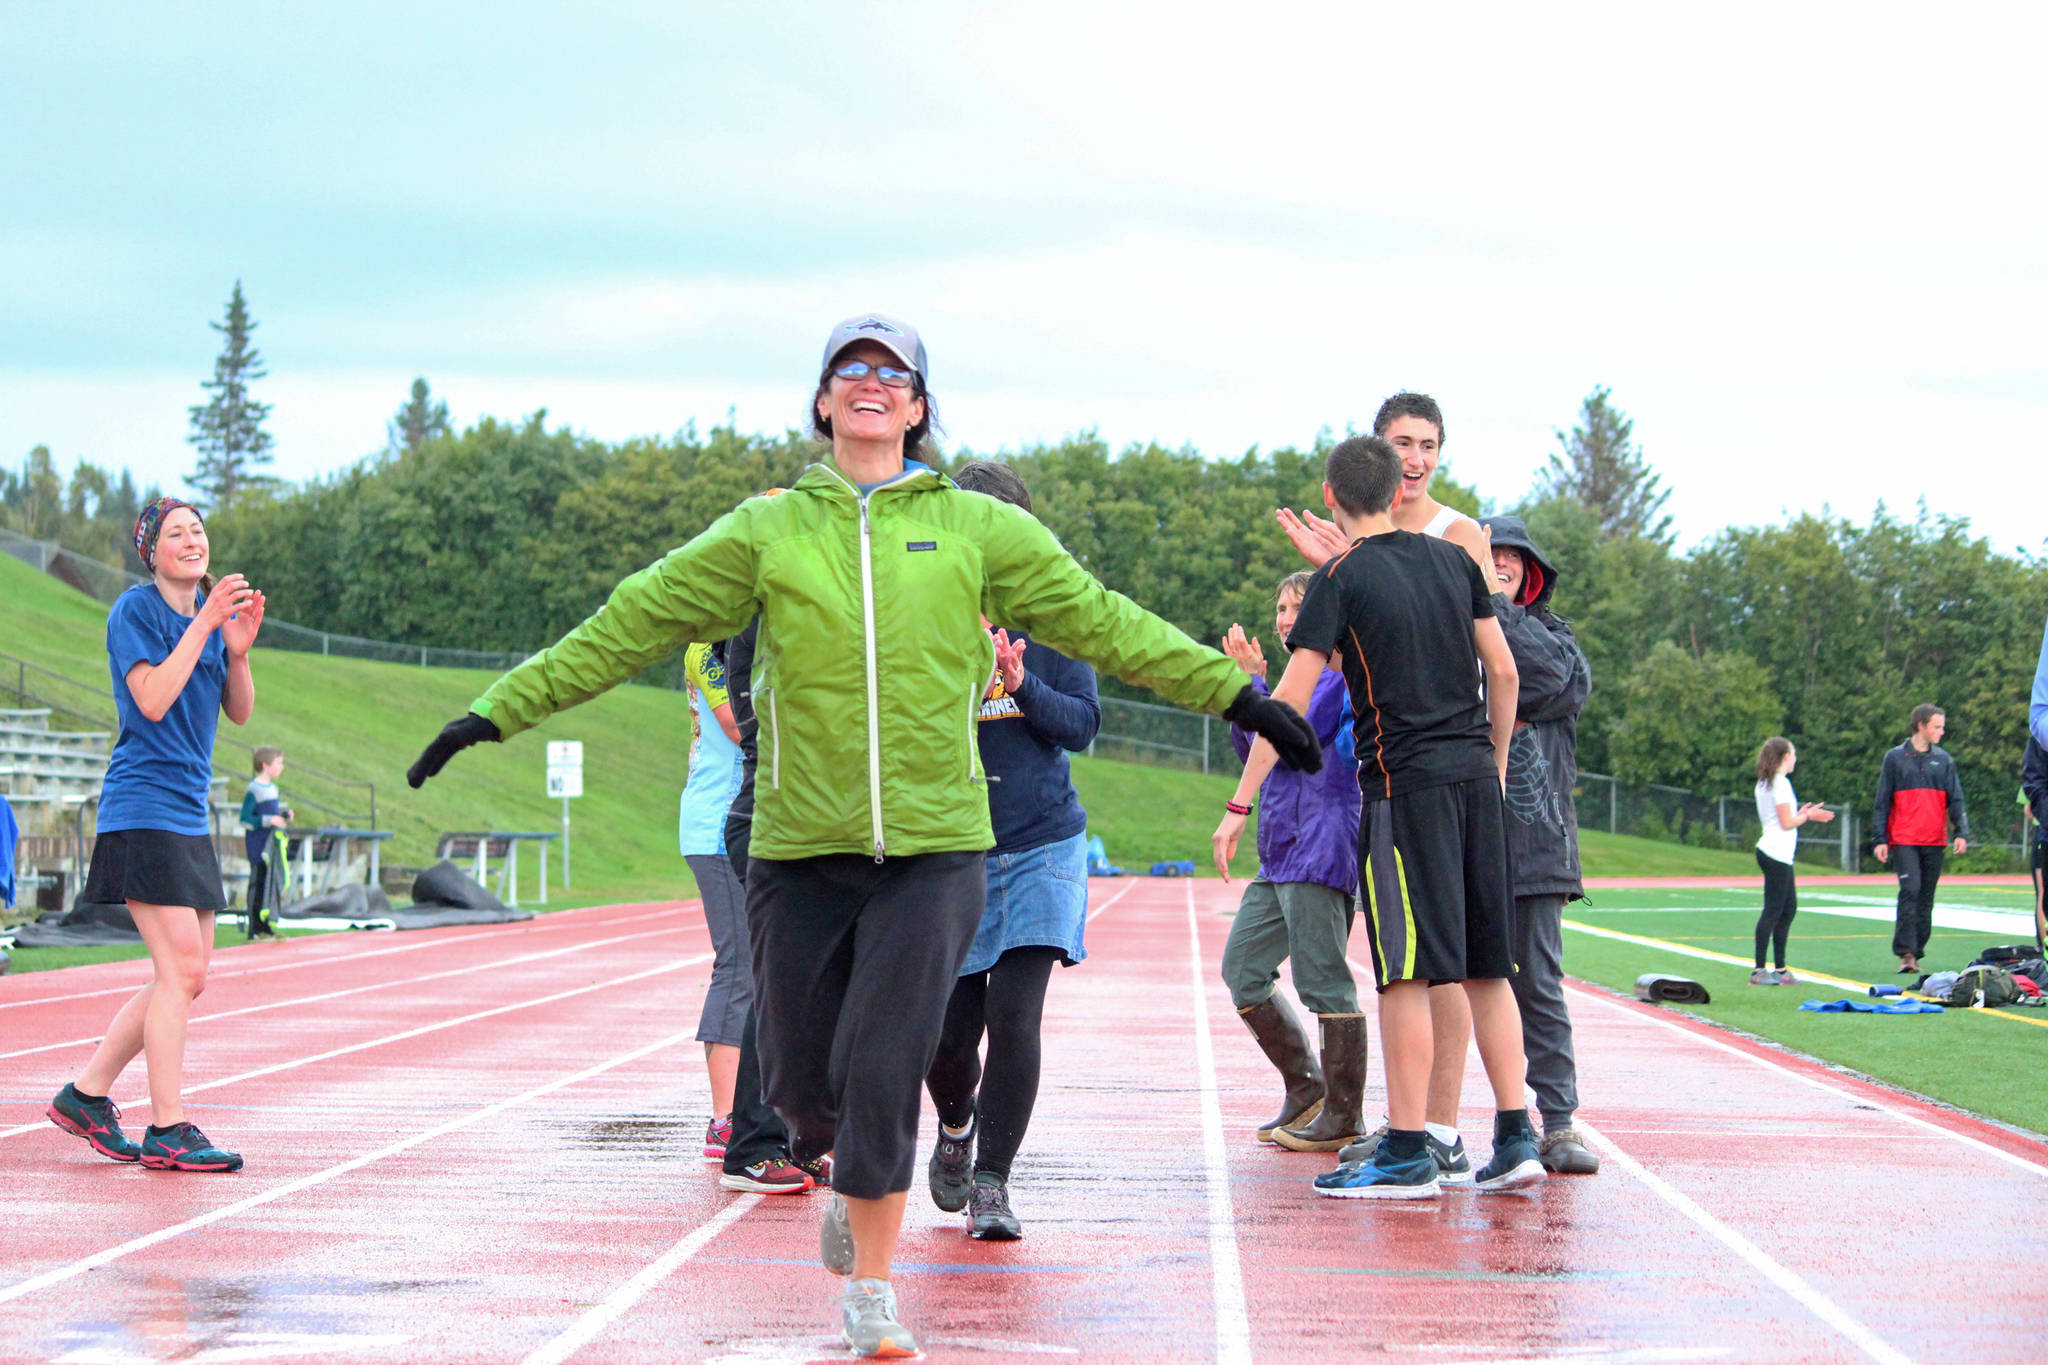 Saundra Hudson crosses the finish line of her first mile run in six months during the Mariner Mile event Thursday, Sept. 14, 2017 at the high school track in Homer, Alaska. Hudson, an active member of and advocator for the Homer running community and teacher at Homer High School, experienced a head injury when she slipped on the ice running this past March, and Thursday’s fundraising event for the Kachemak Bay Running Club was her first return to running since then. (Photo by Megan Pacer/Homer News)